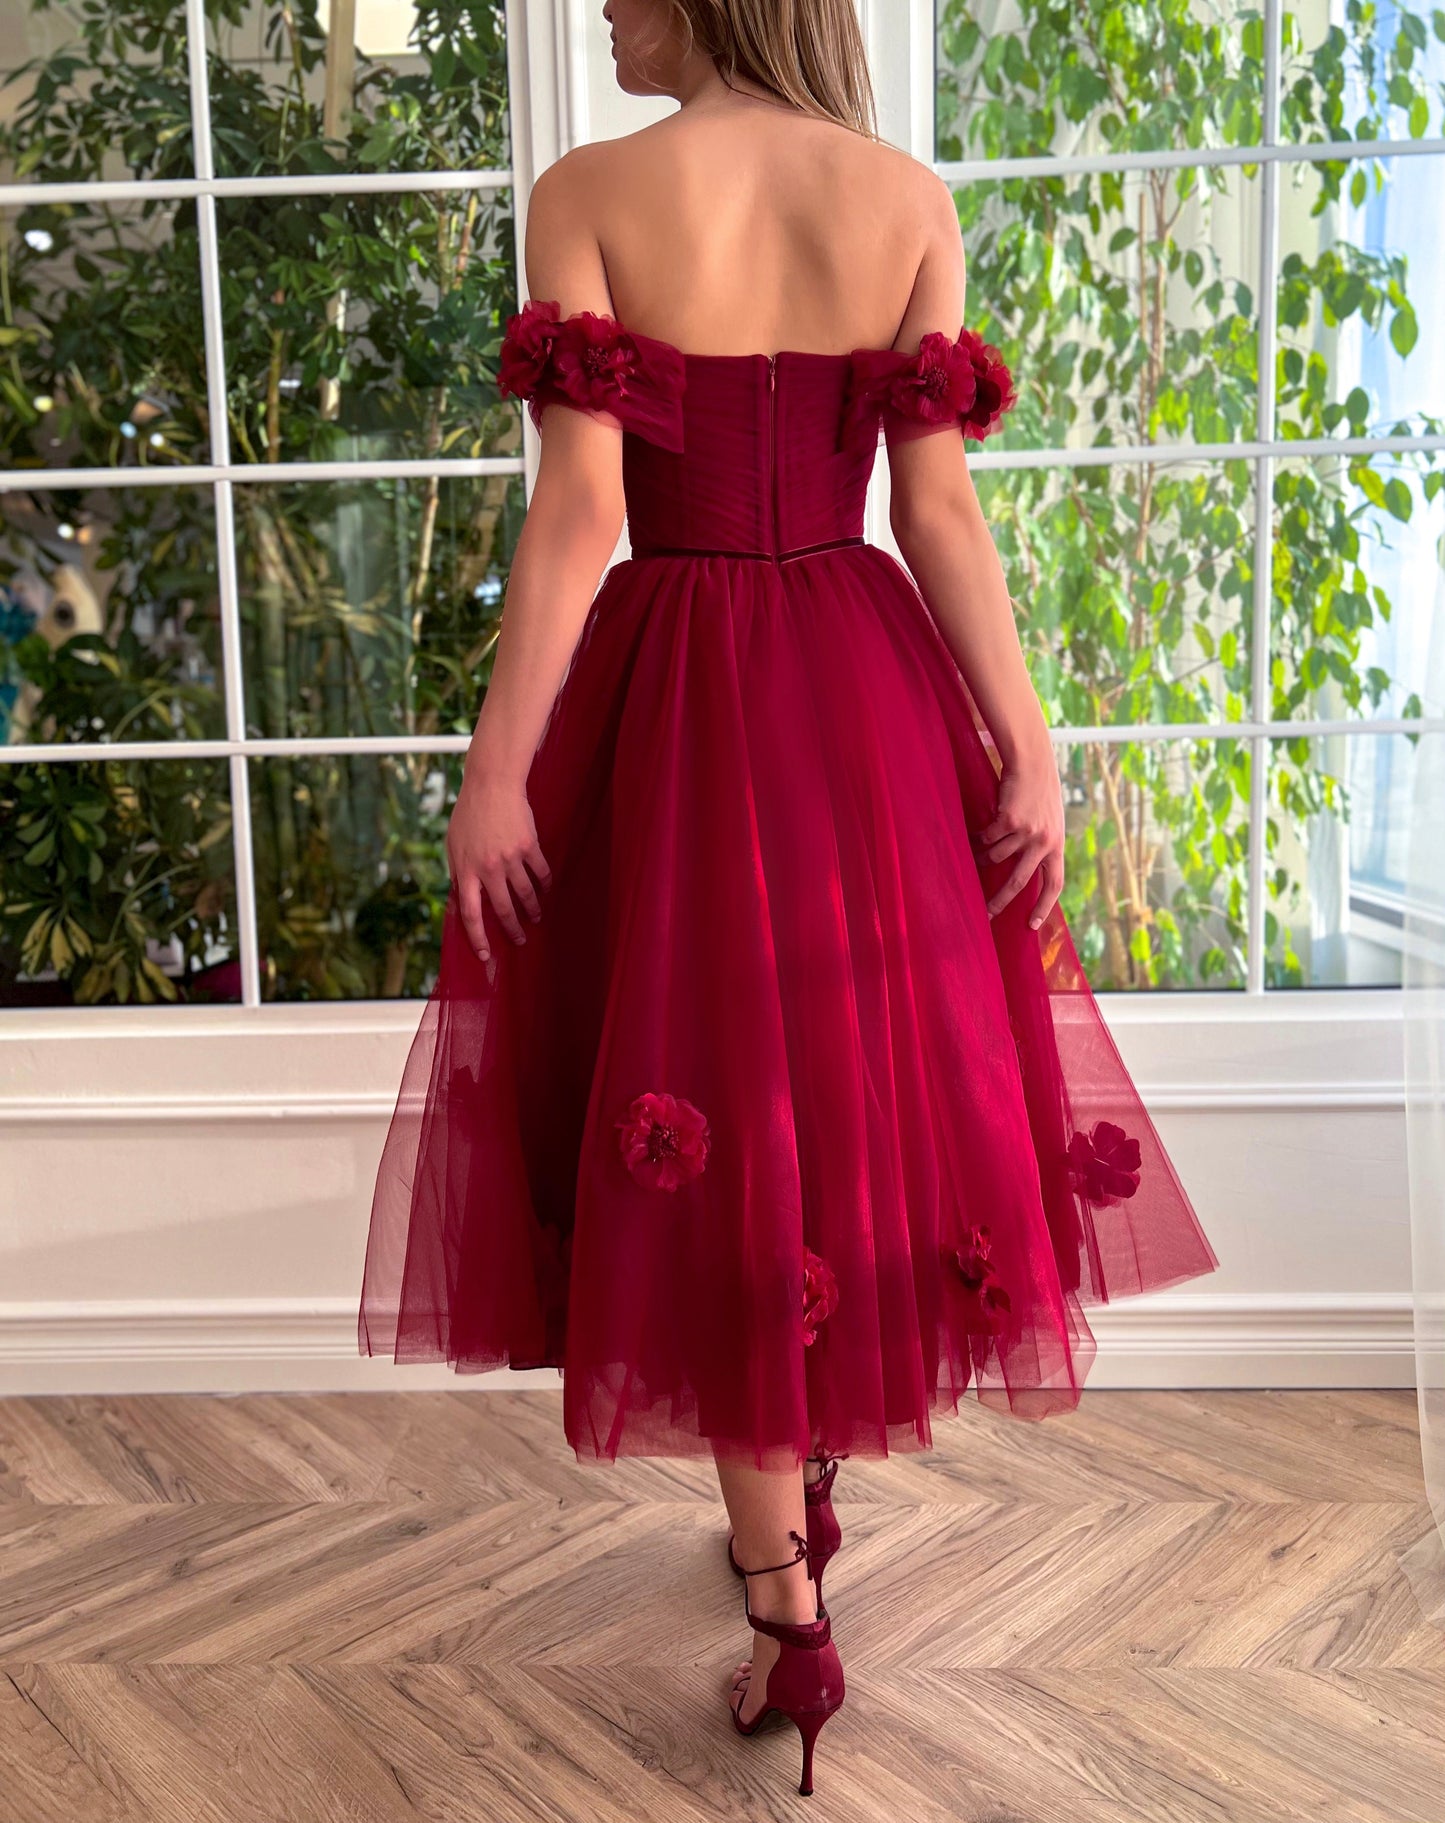 Red midi dress with embroidery, flowers and off the shoulder sleeves